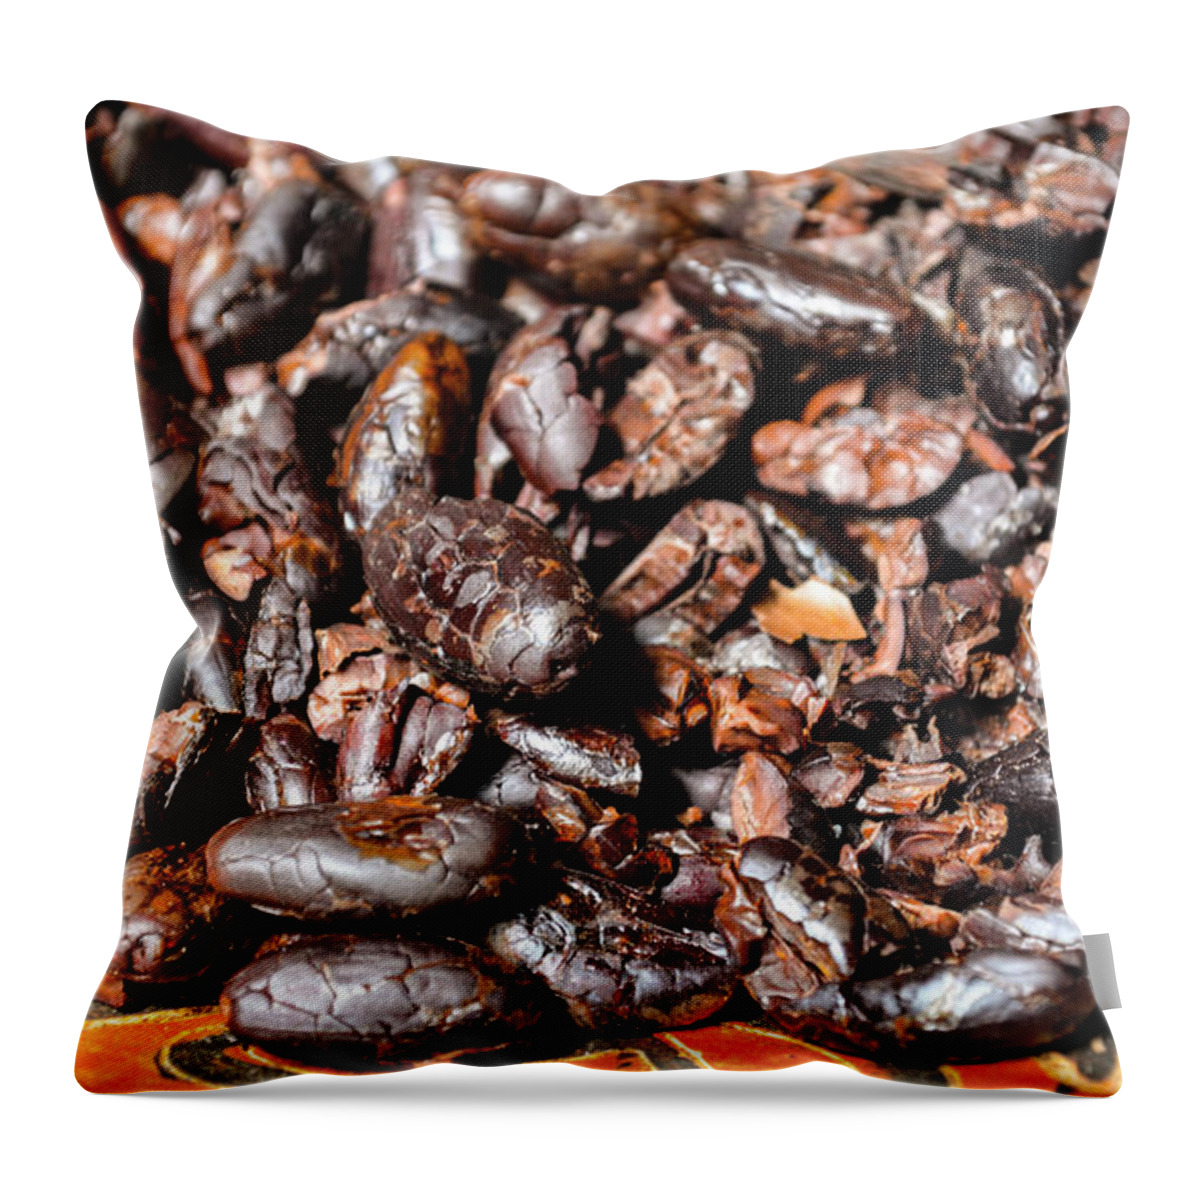 Chocolate Throw Pillow featuring the photograph Chocolate. by Ksenia VanderHoff